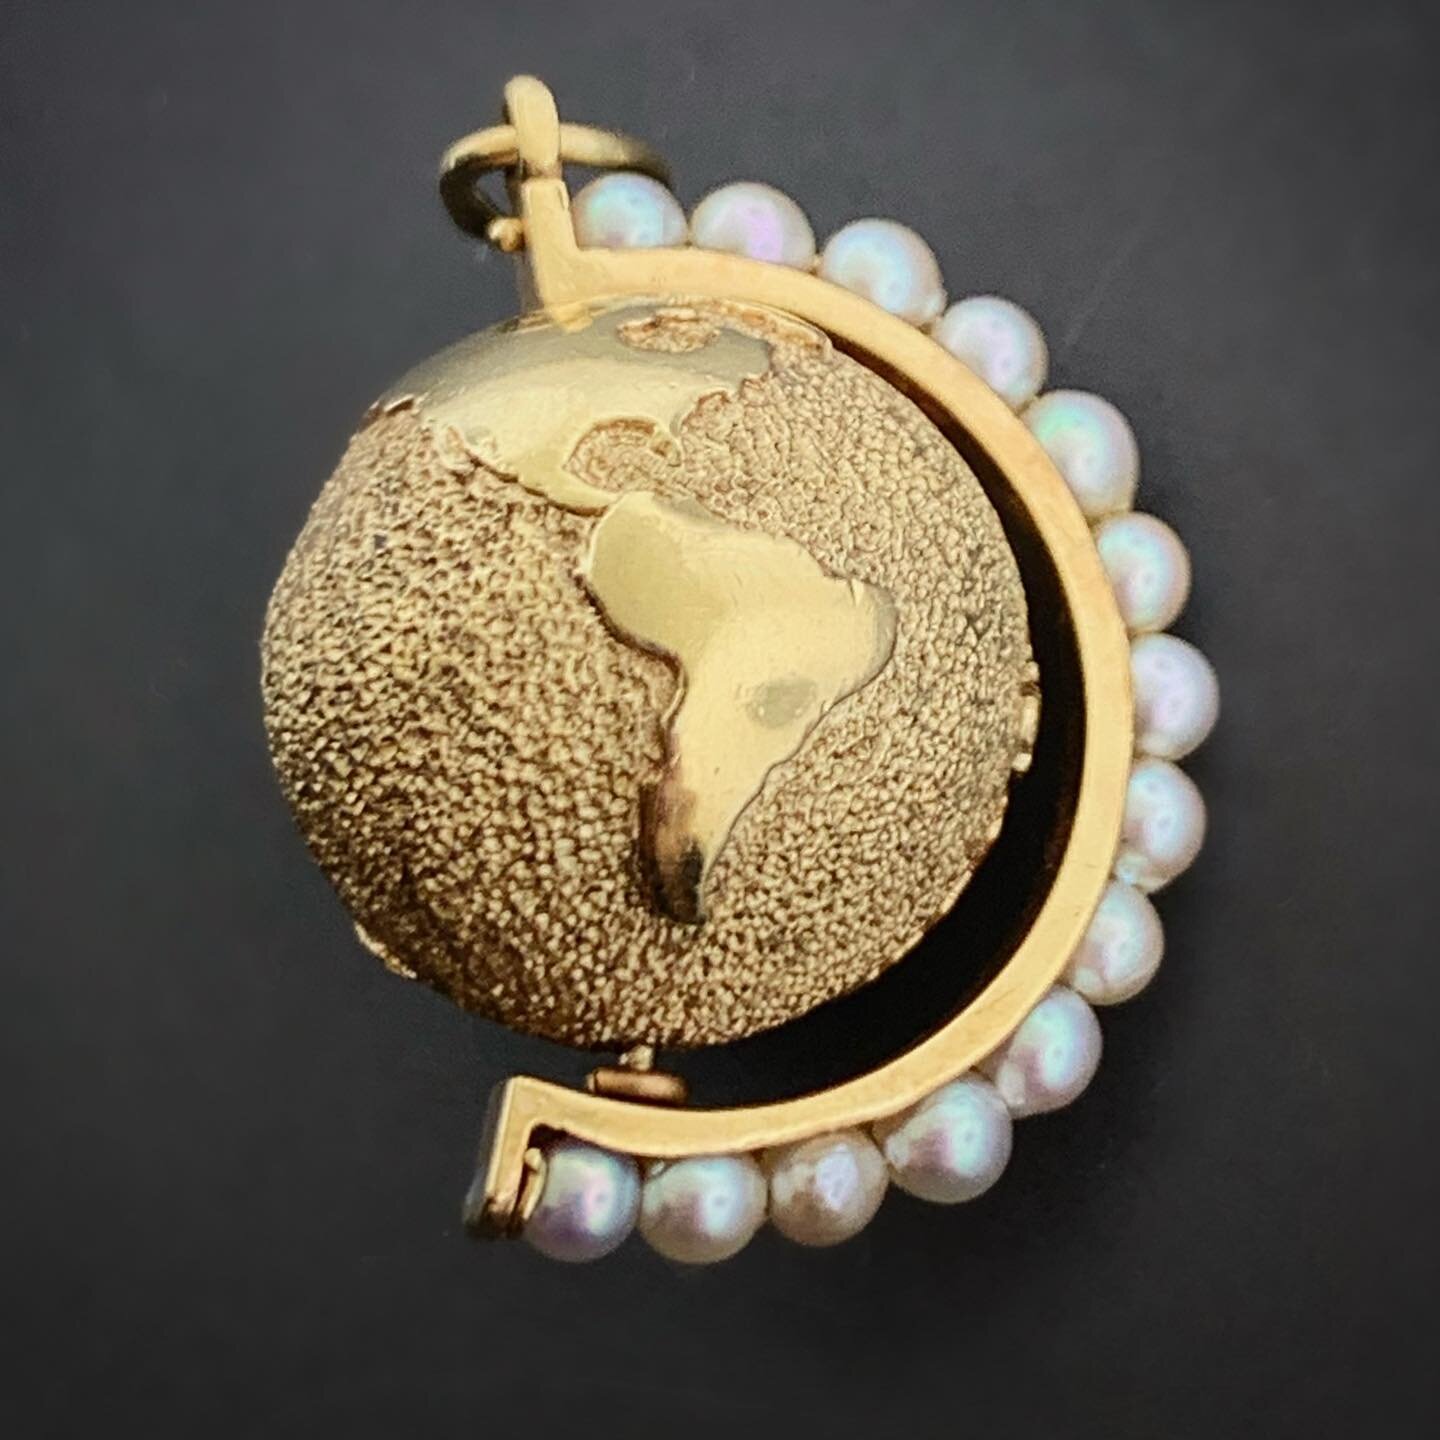 Vintage 14k Yellow Gold Globe Charm w/ Pearls 

DM to inquire

815-13380